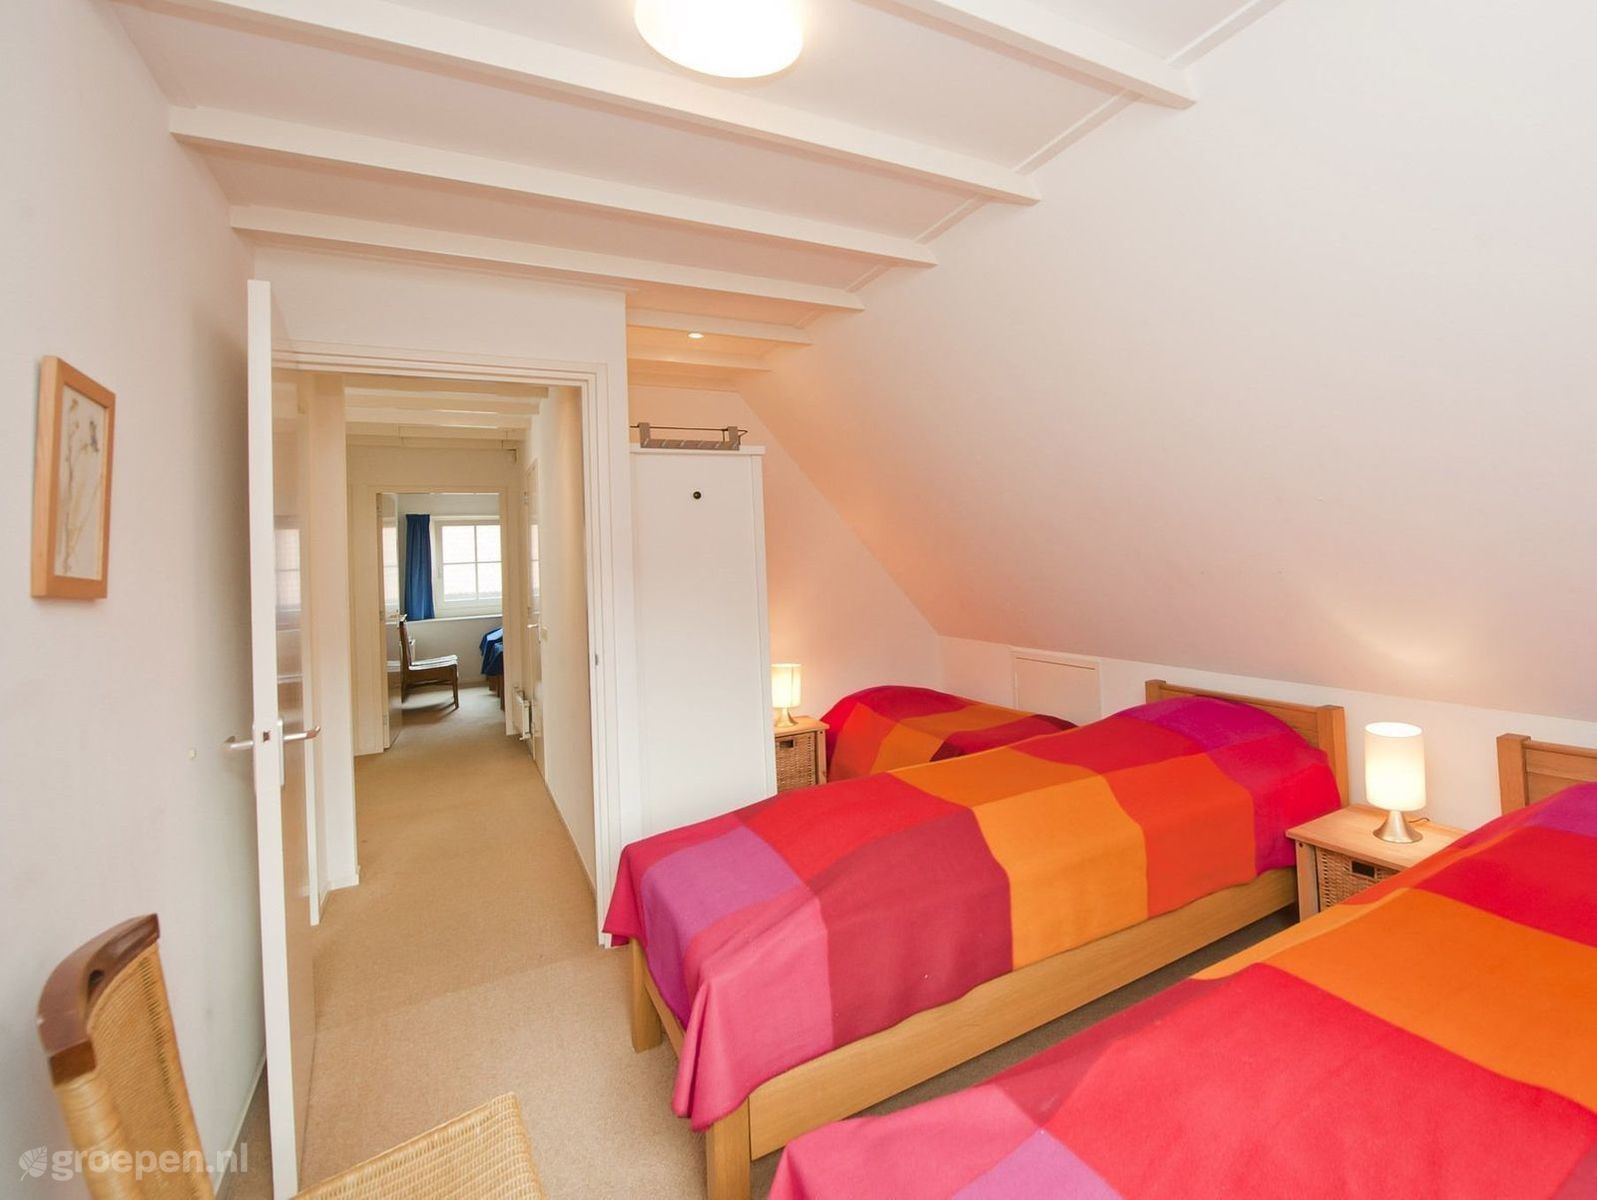 Group accommodation Tubbergen